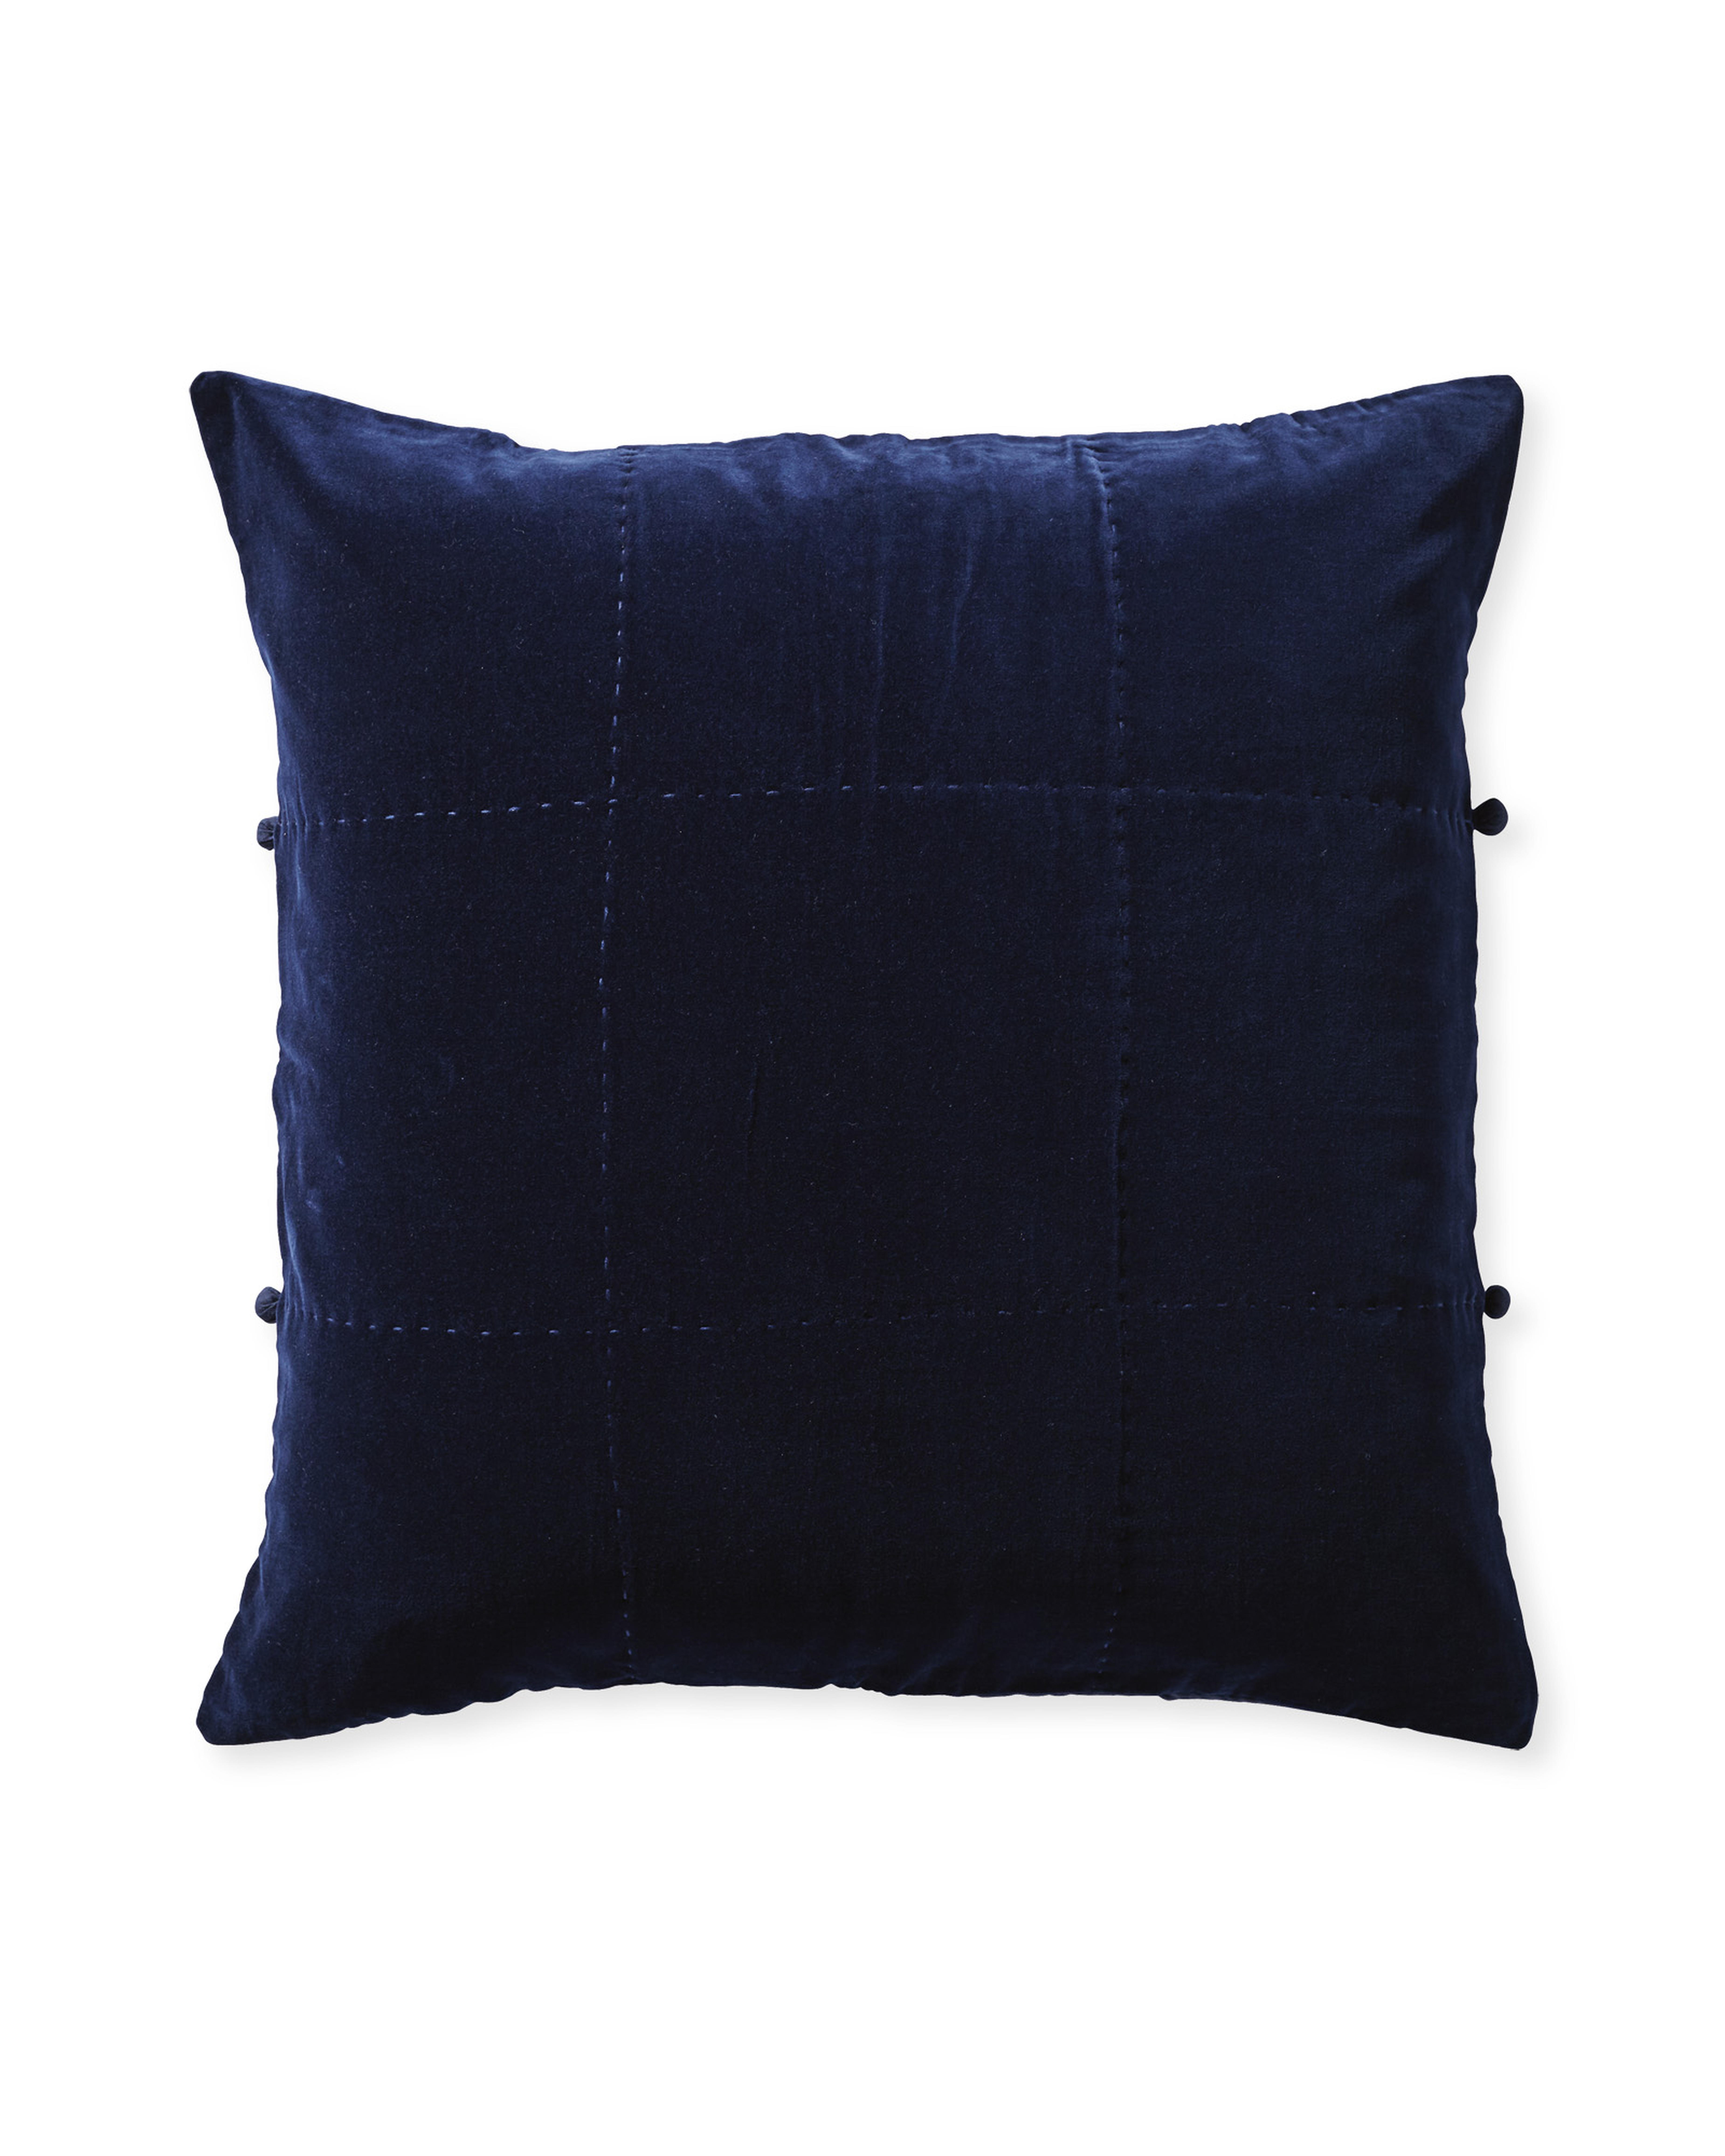 Townsend Euro Sham - Navy - Cotton Flannel Fill - Serena and Lily